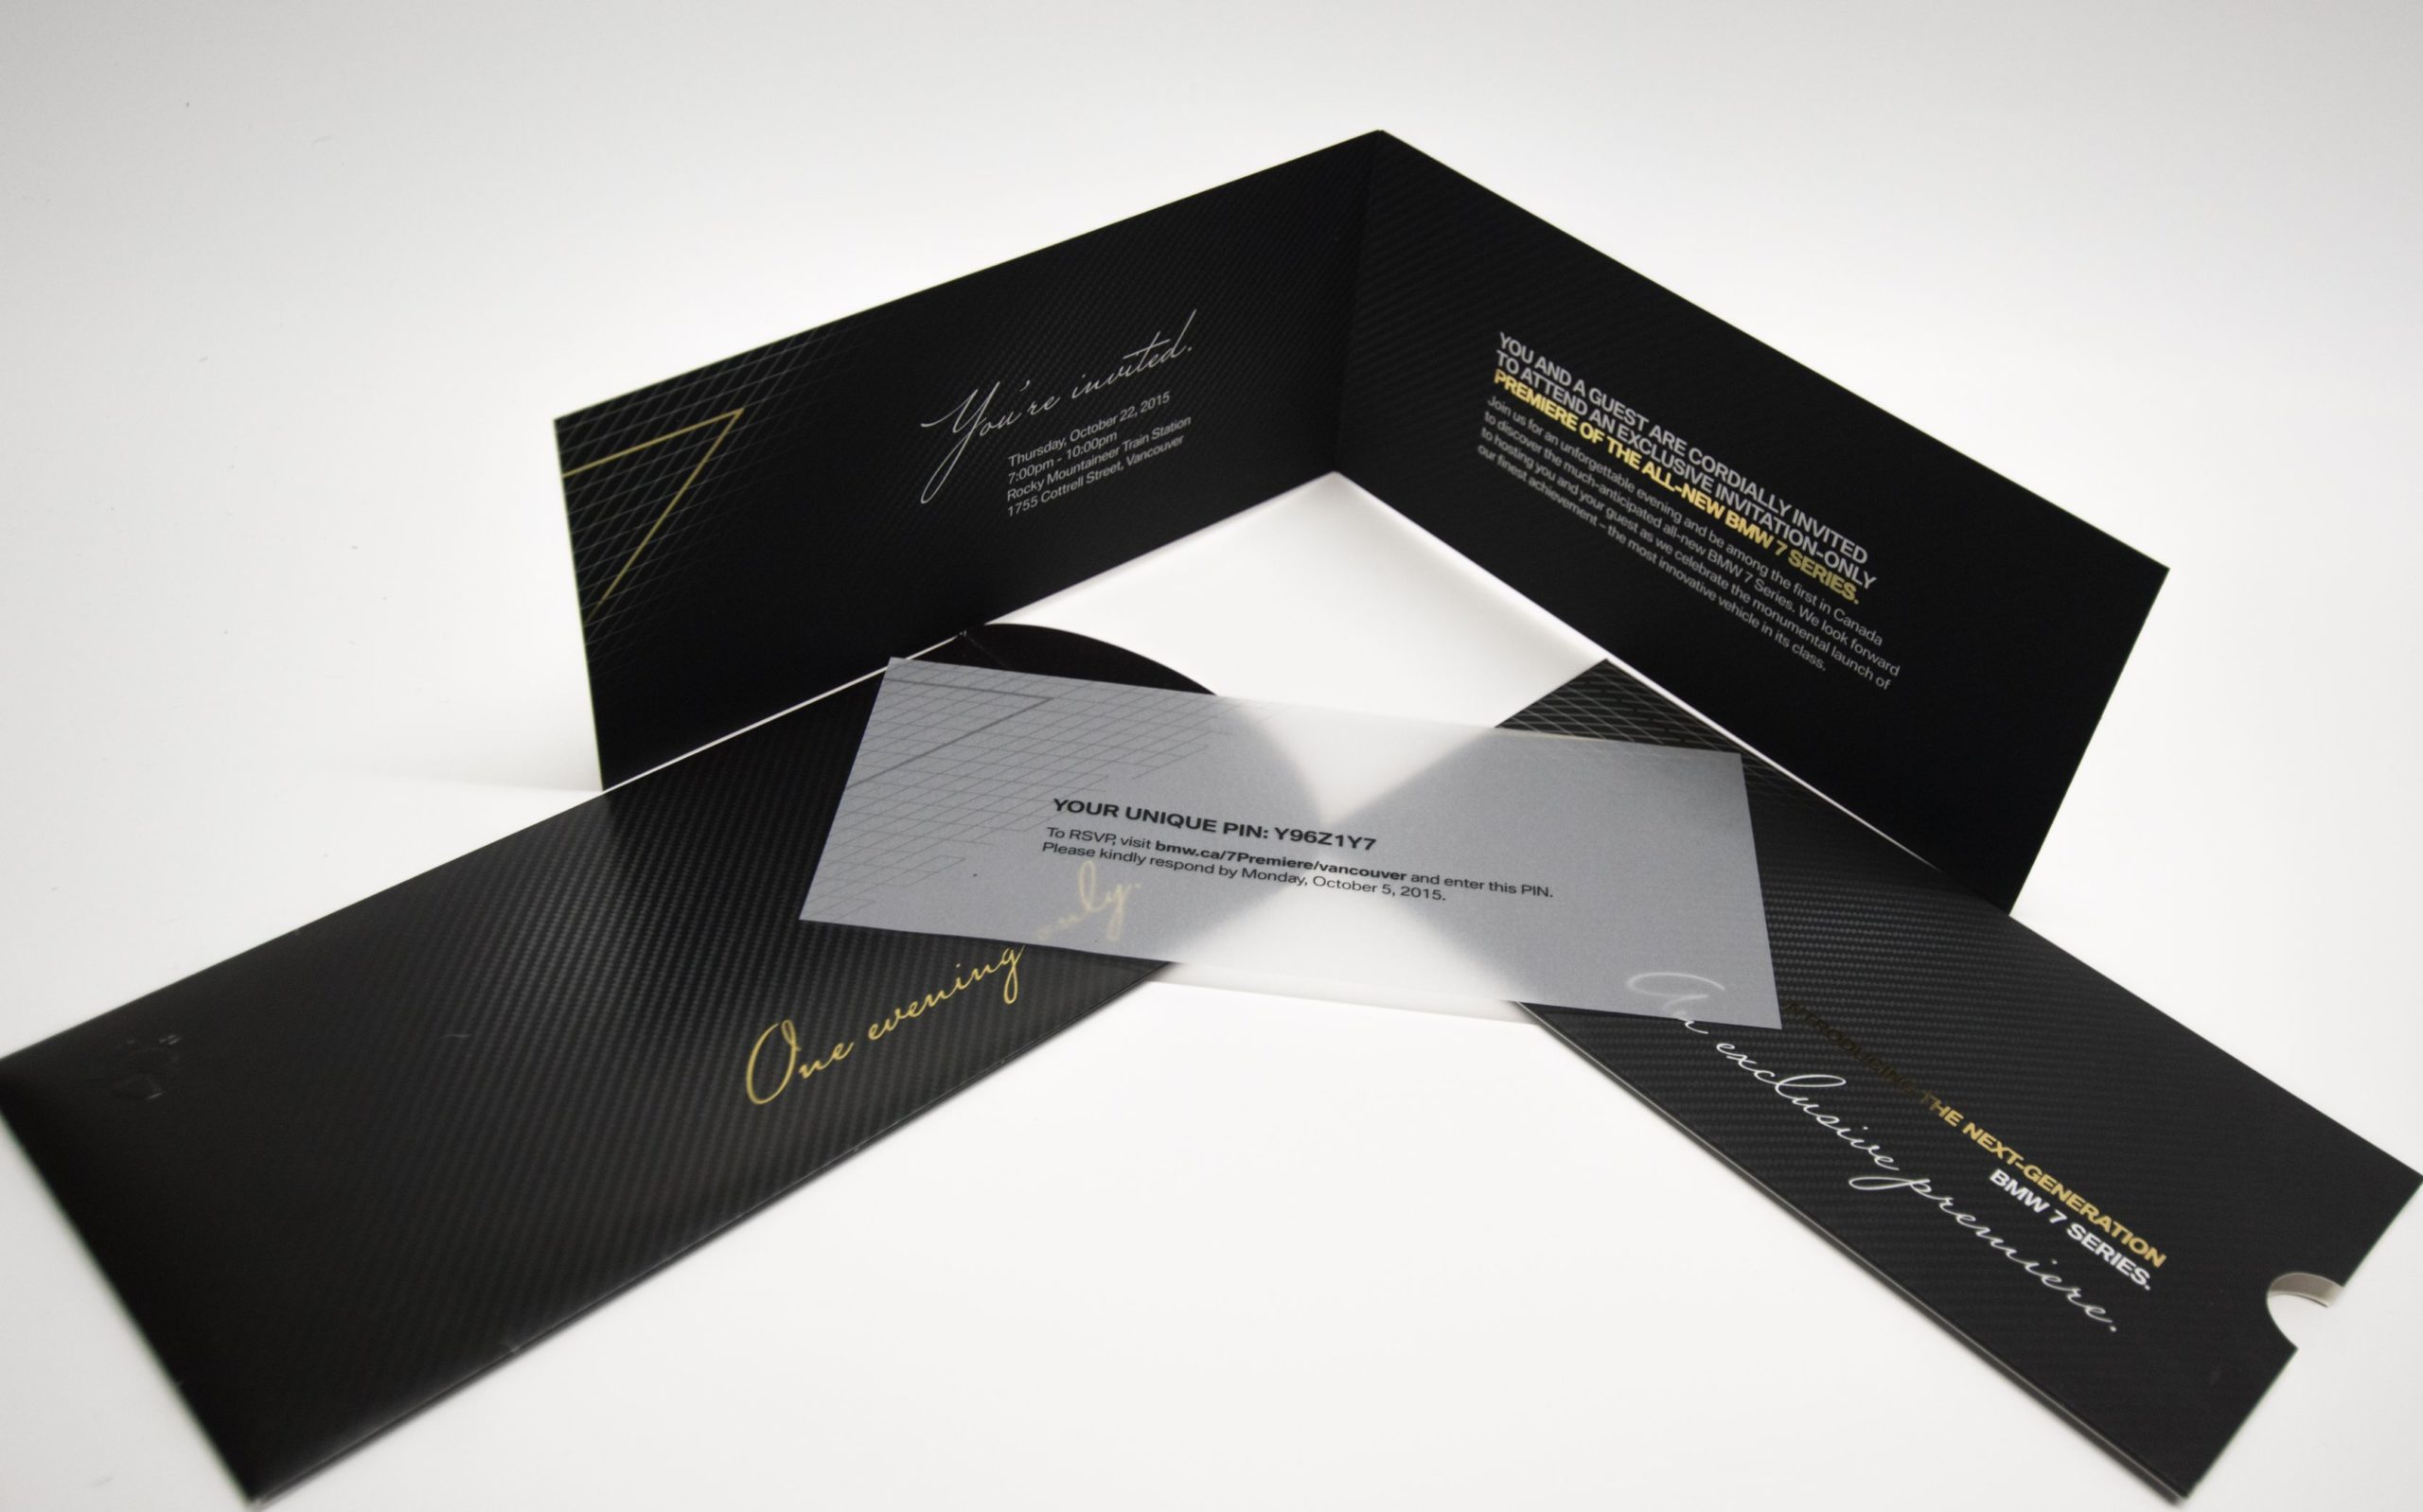 BMW 7 Series Invitation event with custom printed code